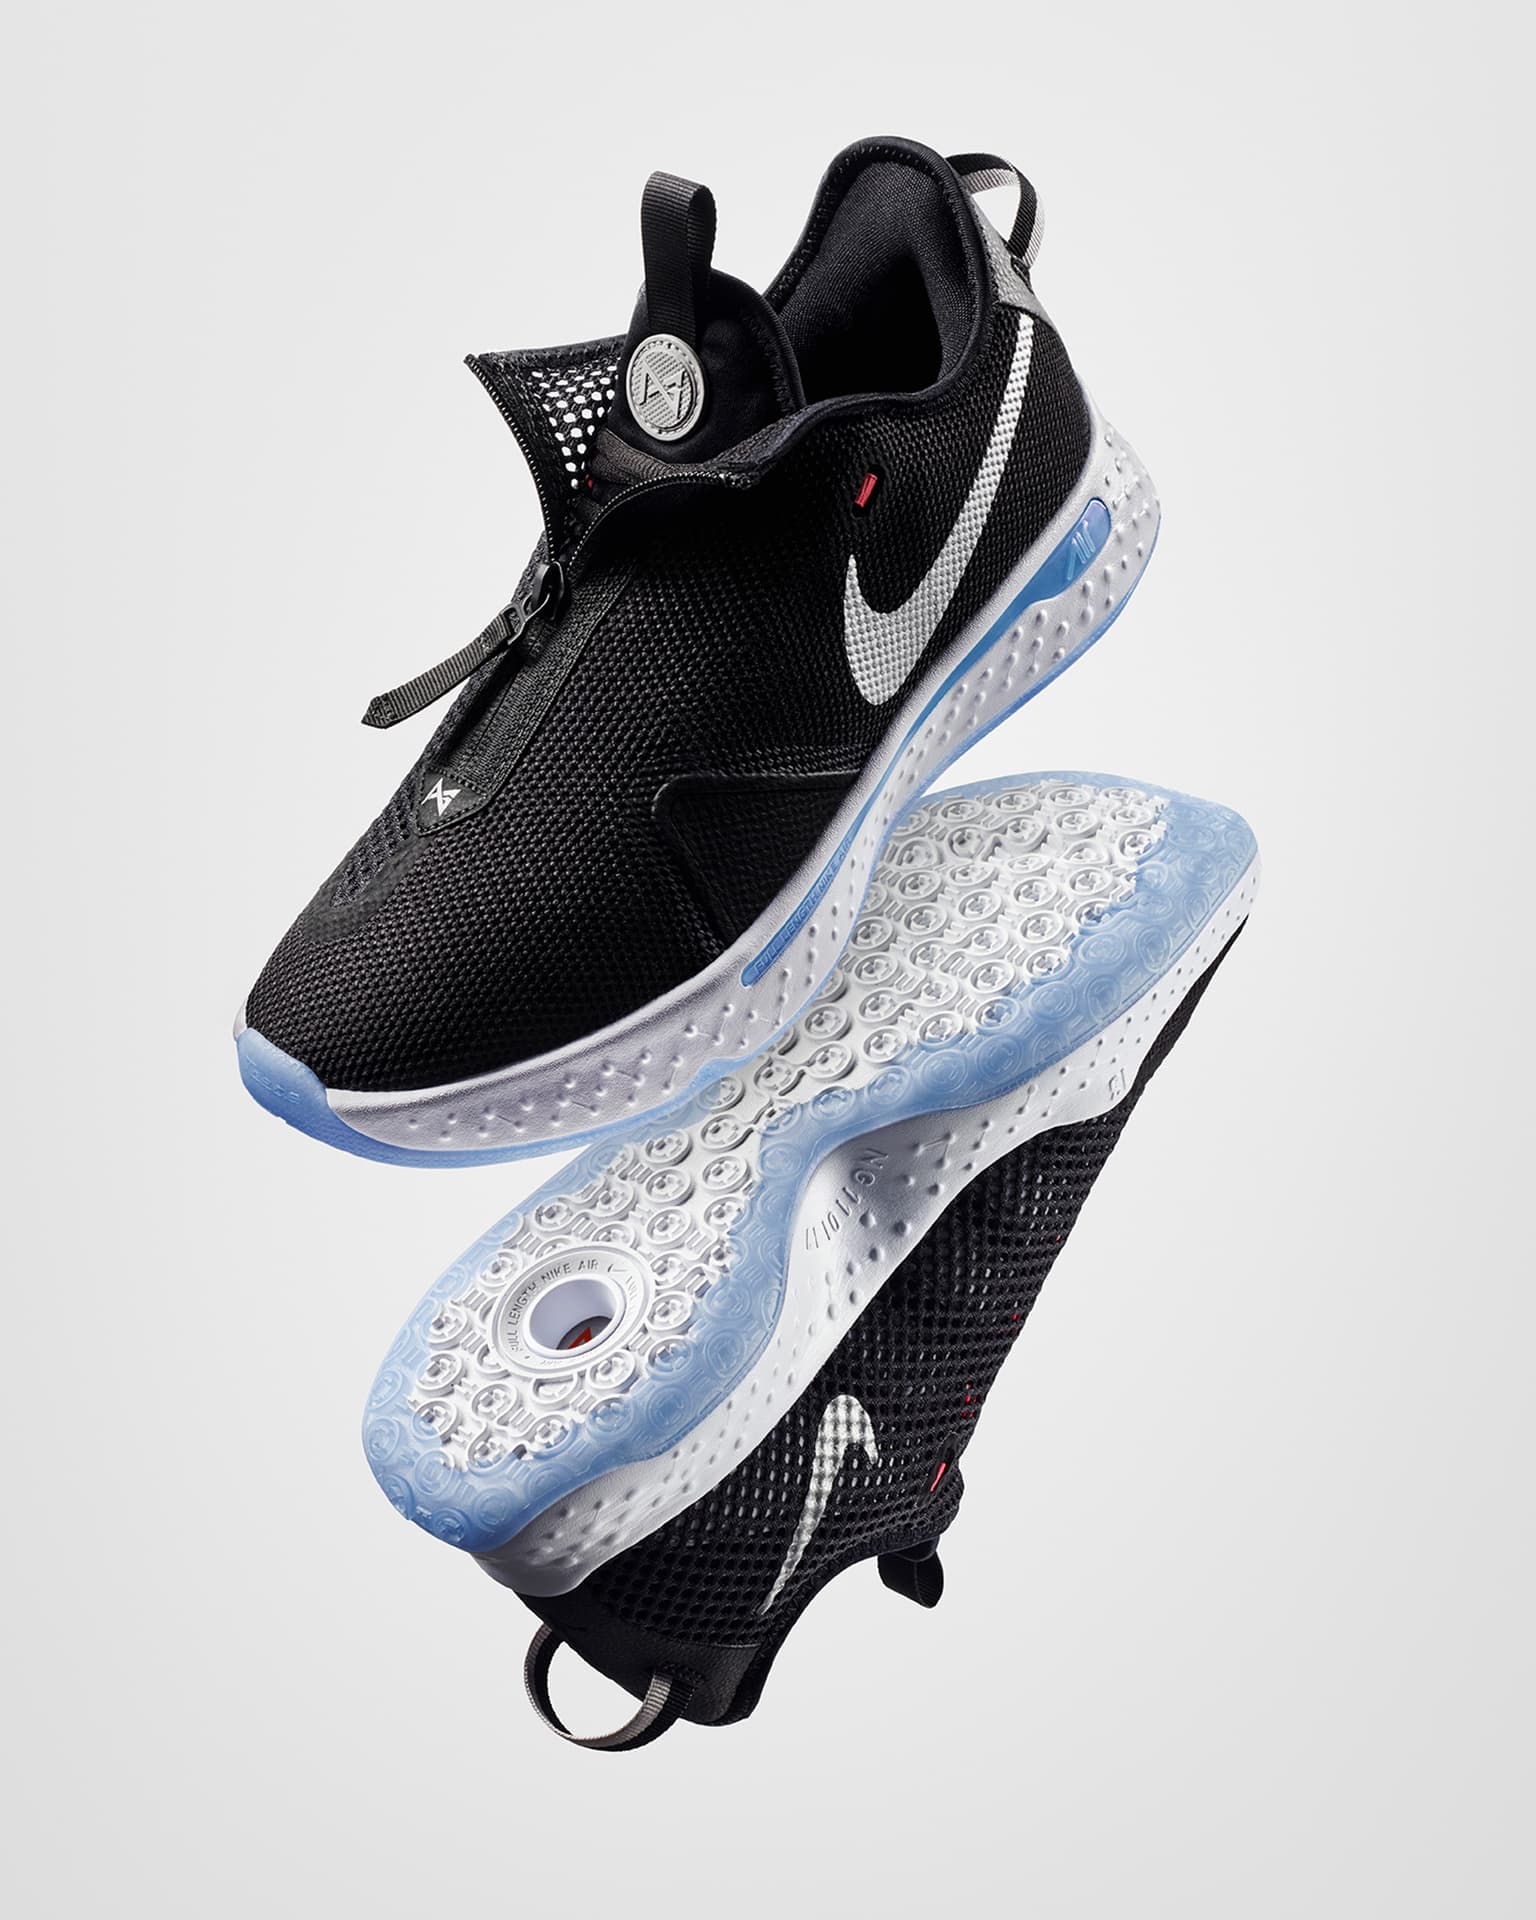 What Pros Wear: Paul George's Nike PG 3 Shoes - What Pros Wear